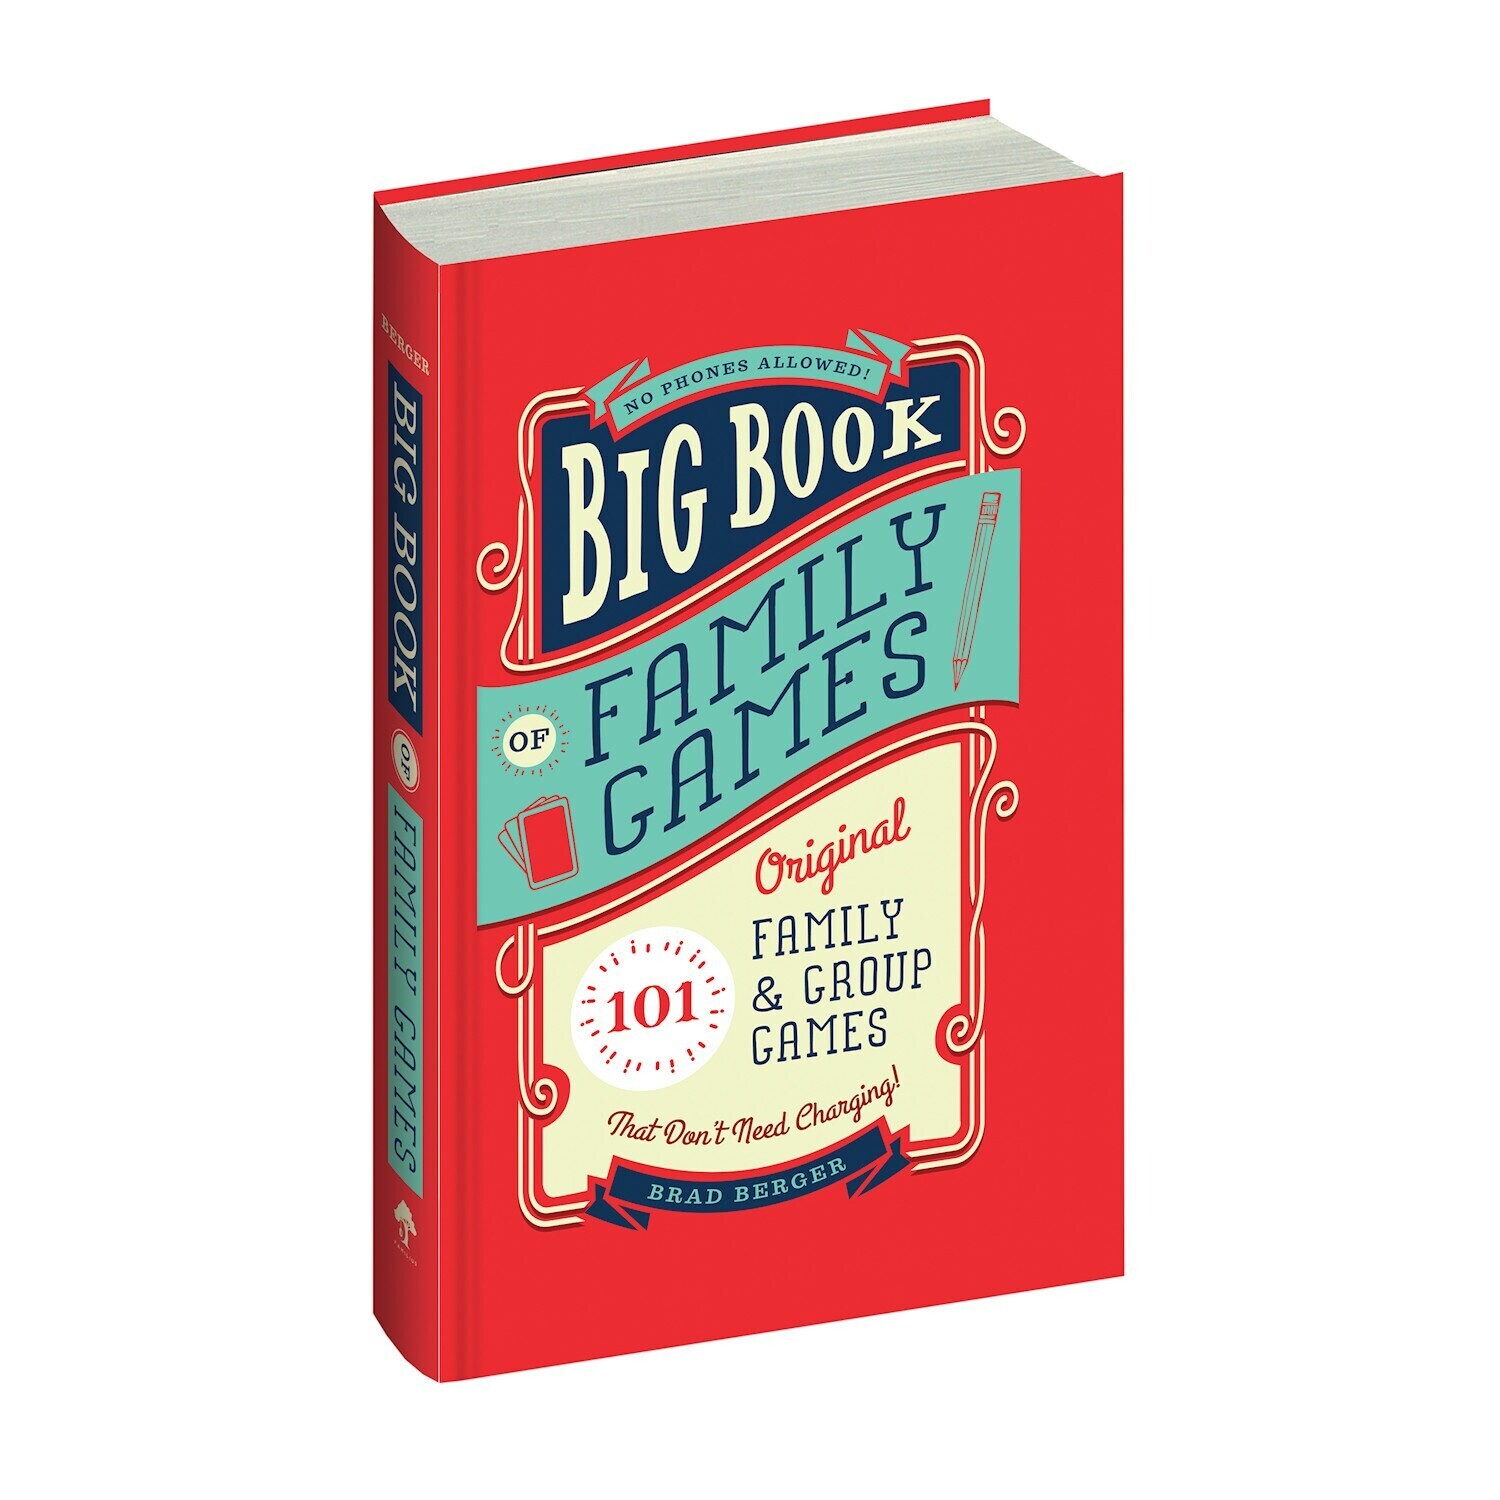 Big Book of Family